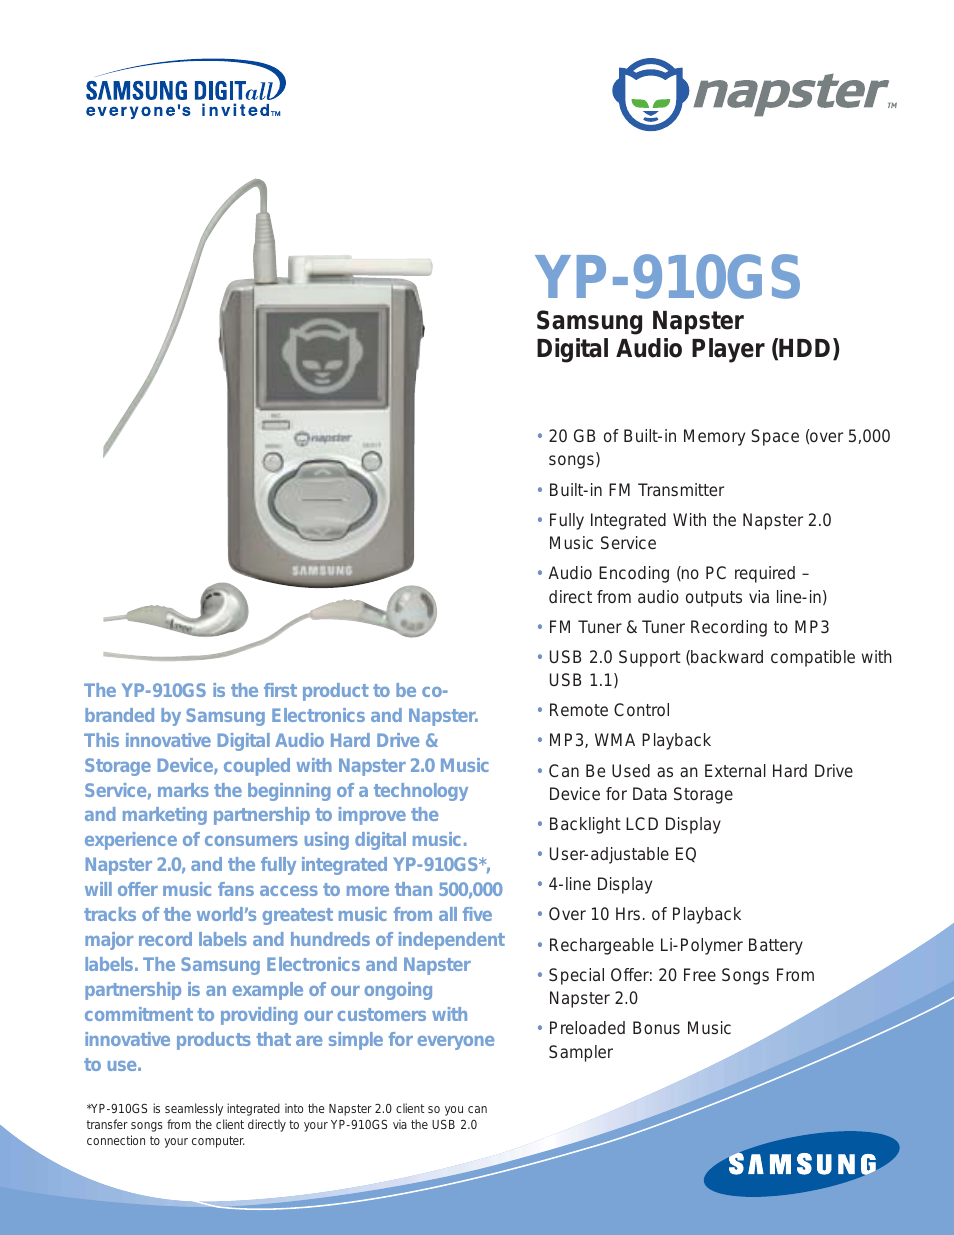 NAPSTER YP-910GS